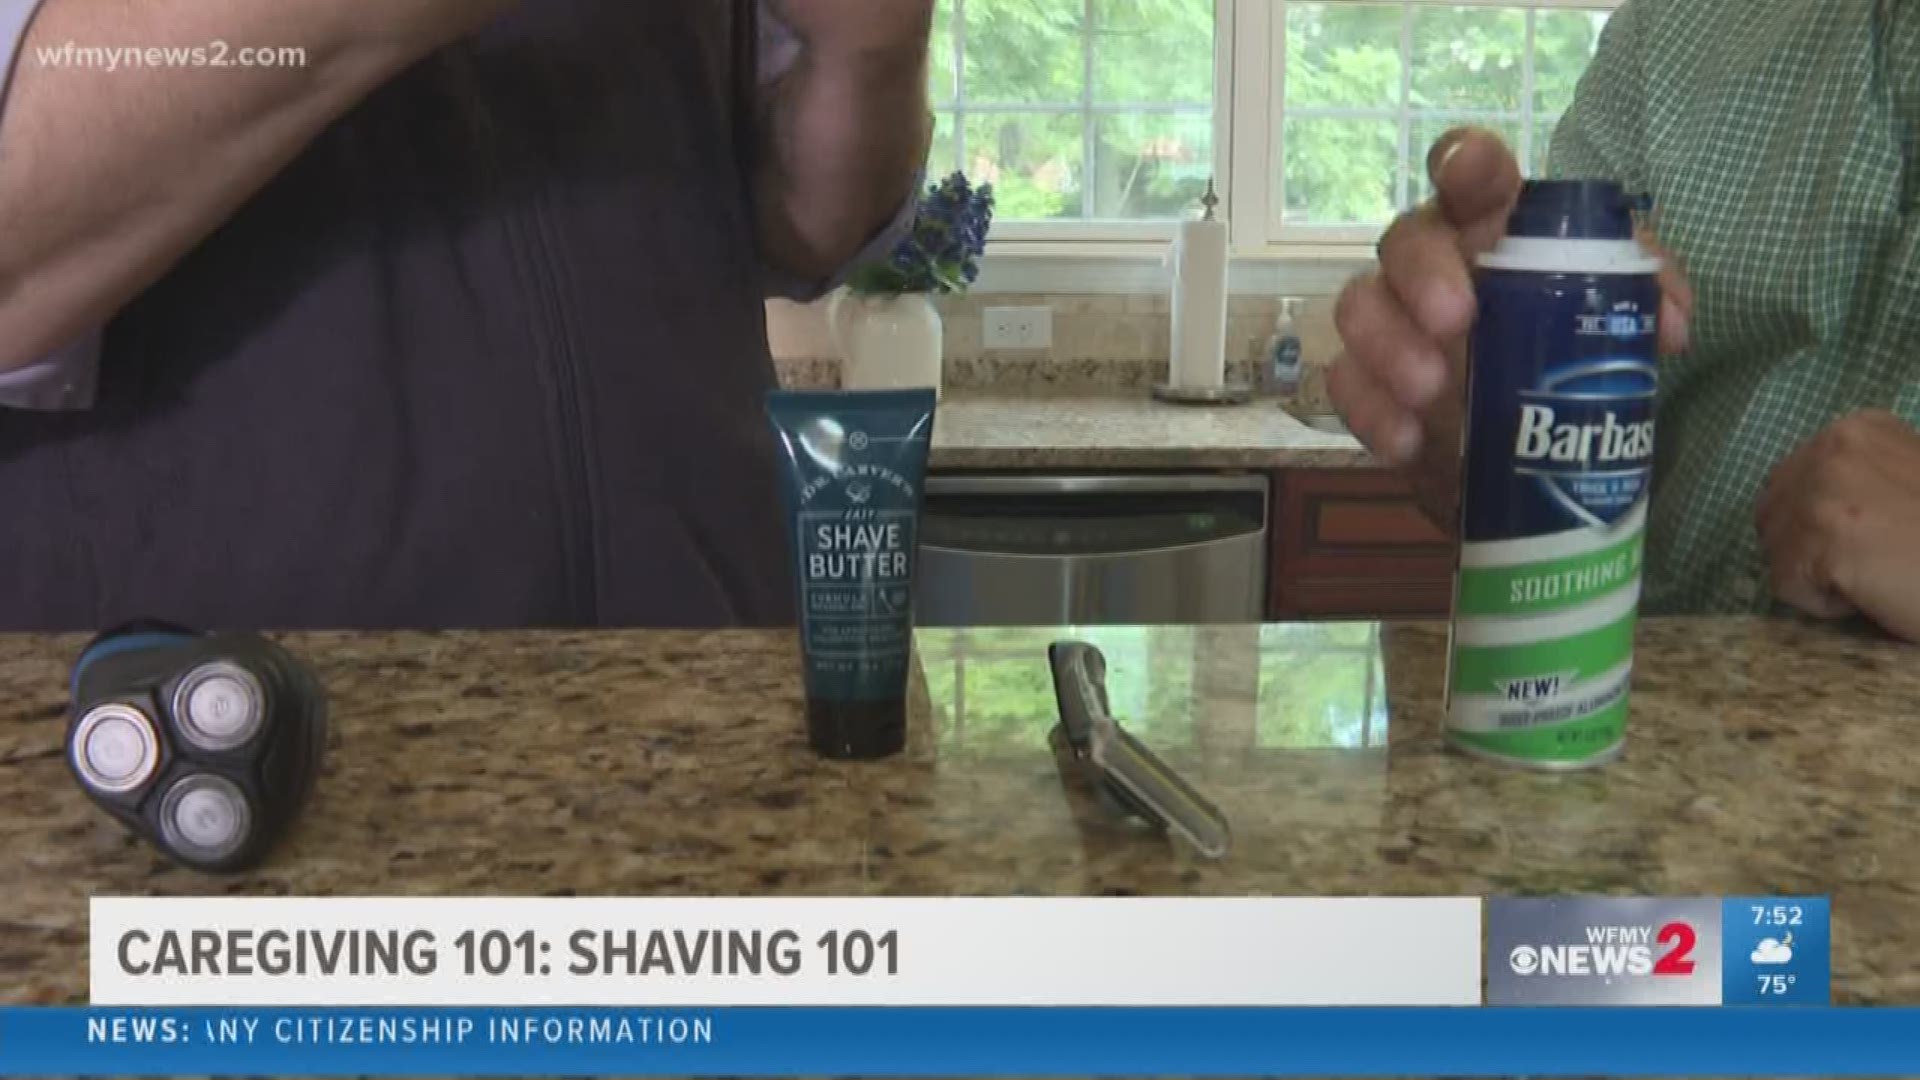 Tom and Scott have advice on better ways to help our loved ones shave.